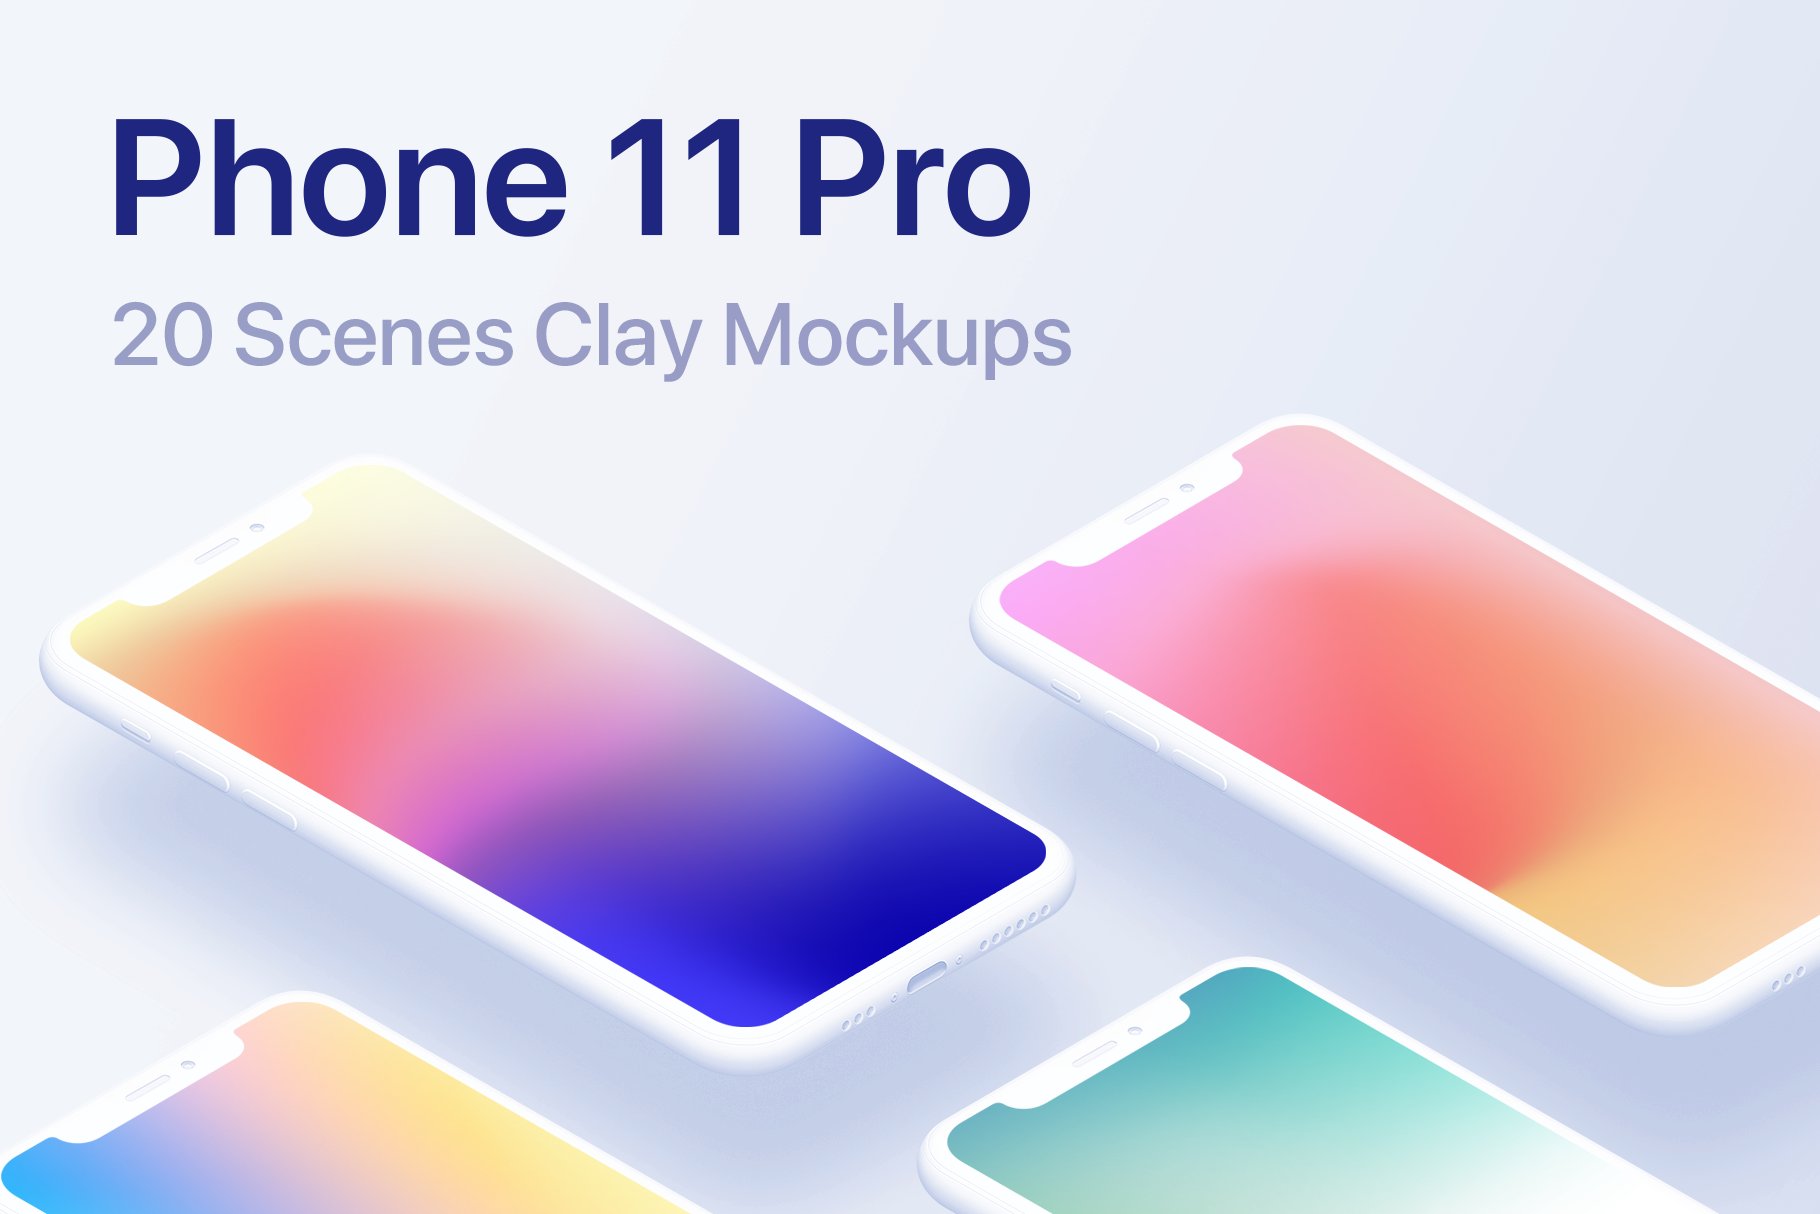 Phone 11 Pro - 20 Clay Mockups cover image.